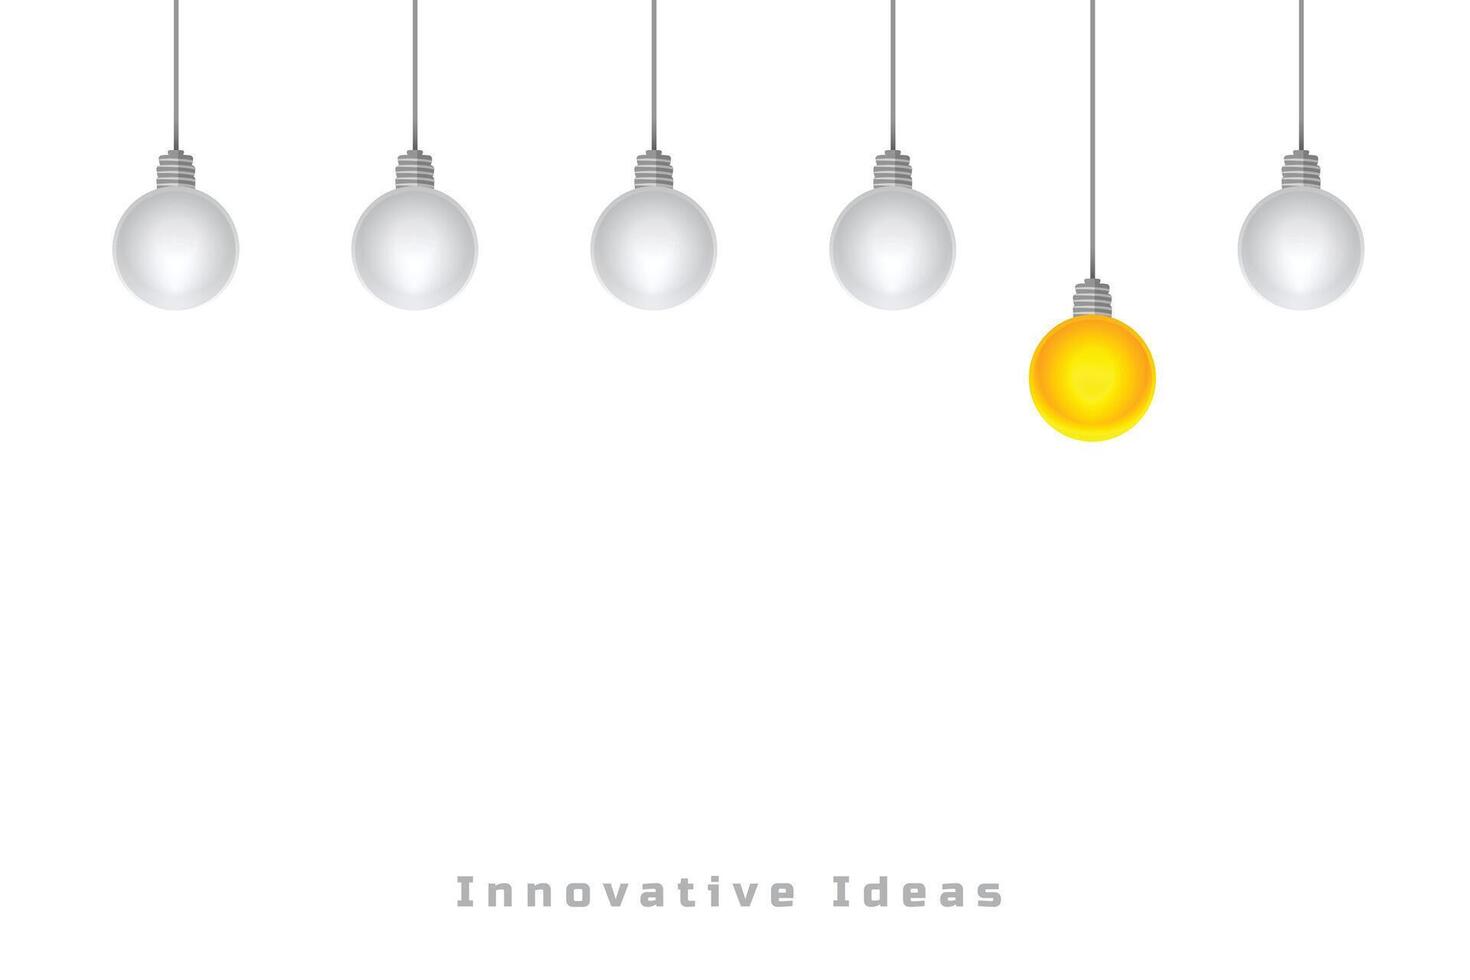 effective thinking idea concept with hanging light bulb sign vector